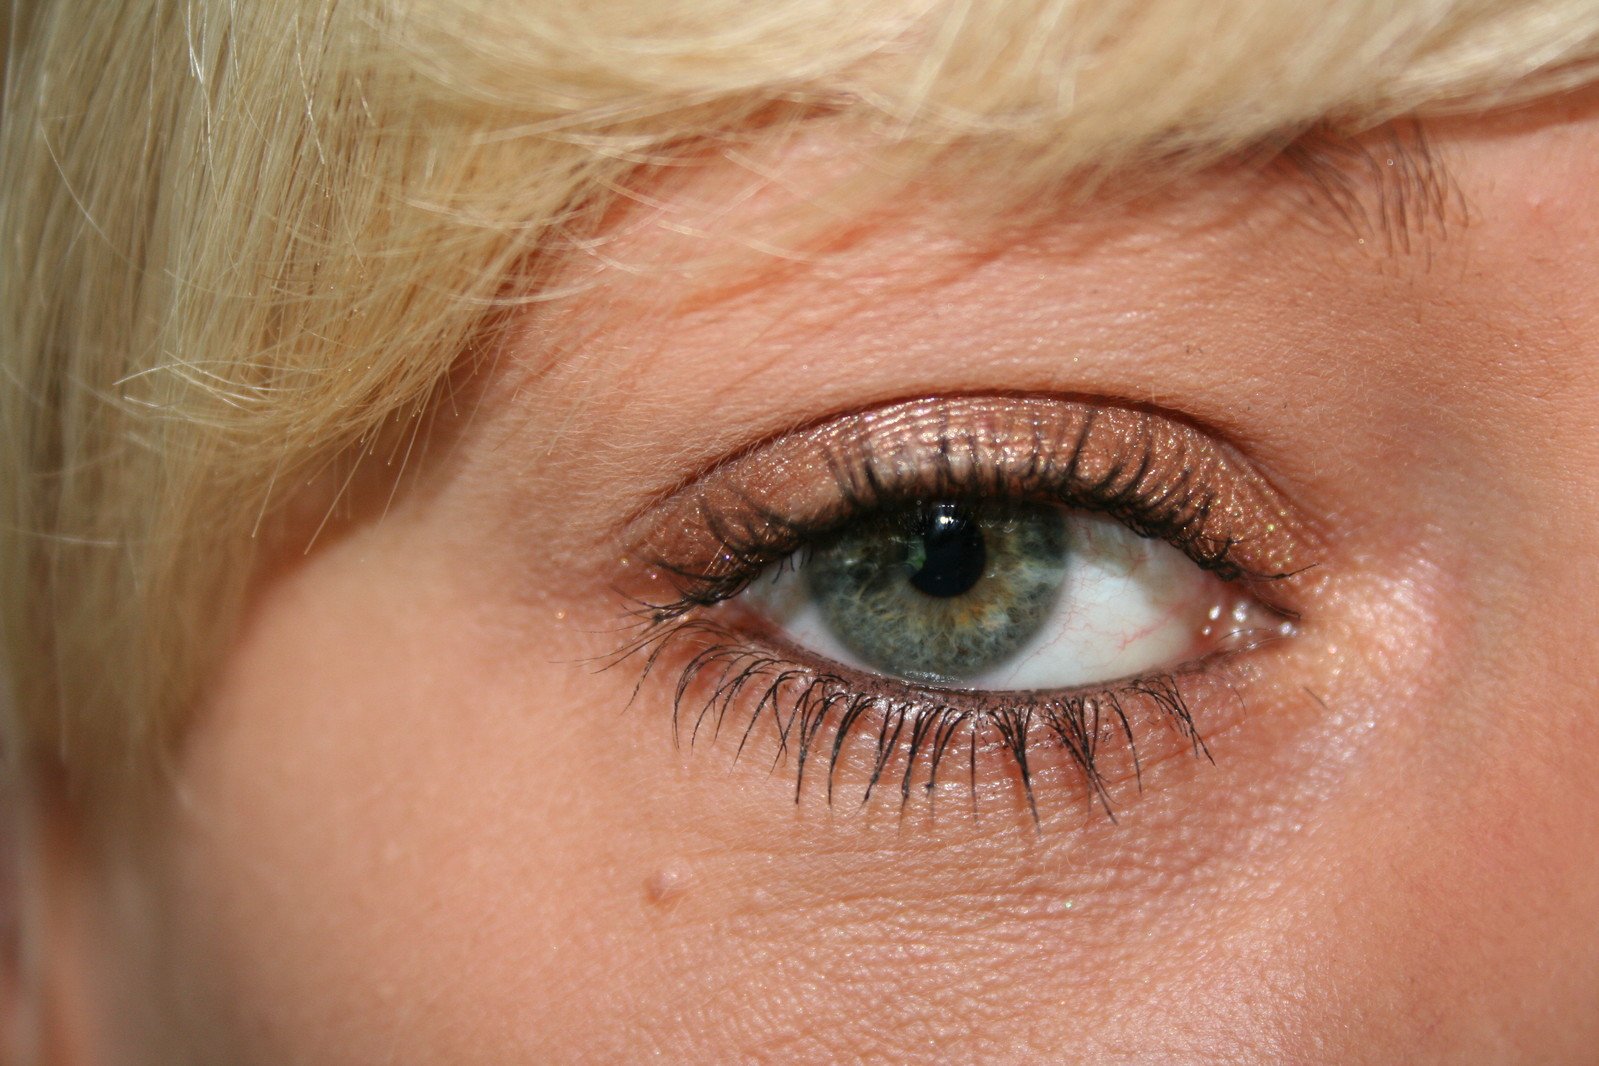 the closeup view of a blond woman's eye